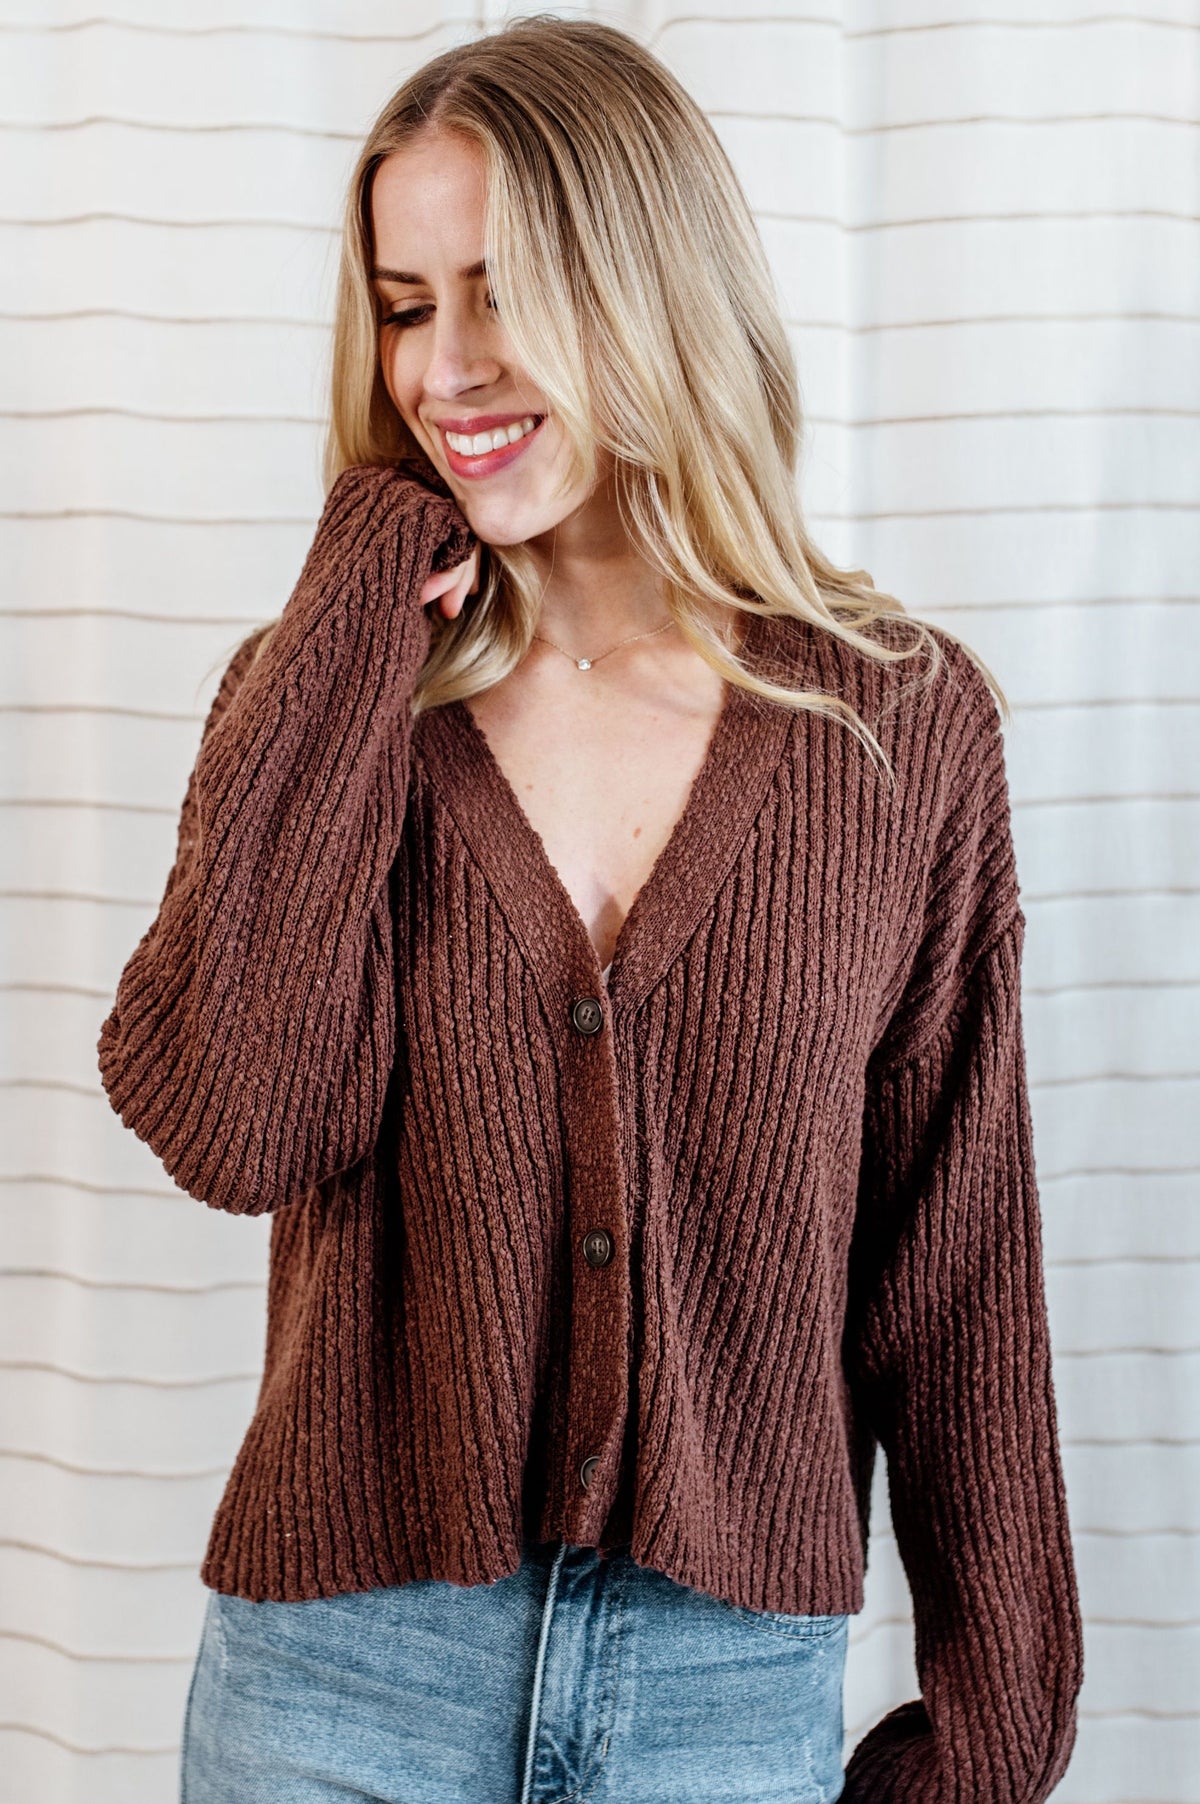 Pecan, knit cardigan sweater with v-neck button down front on model.